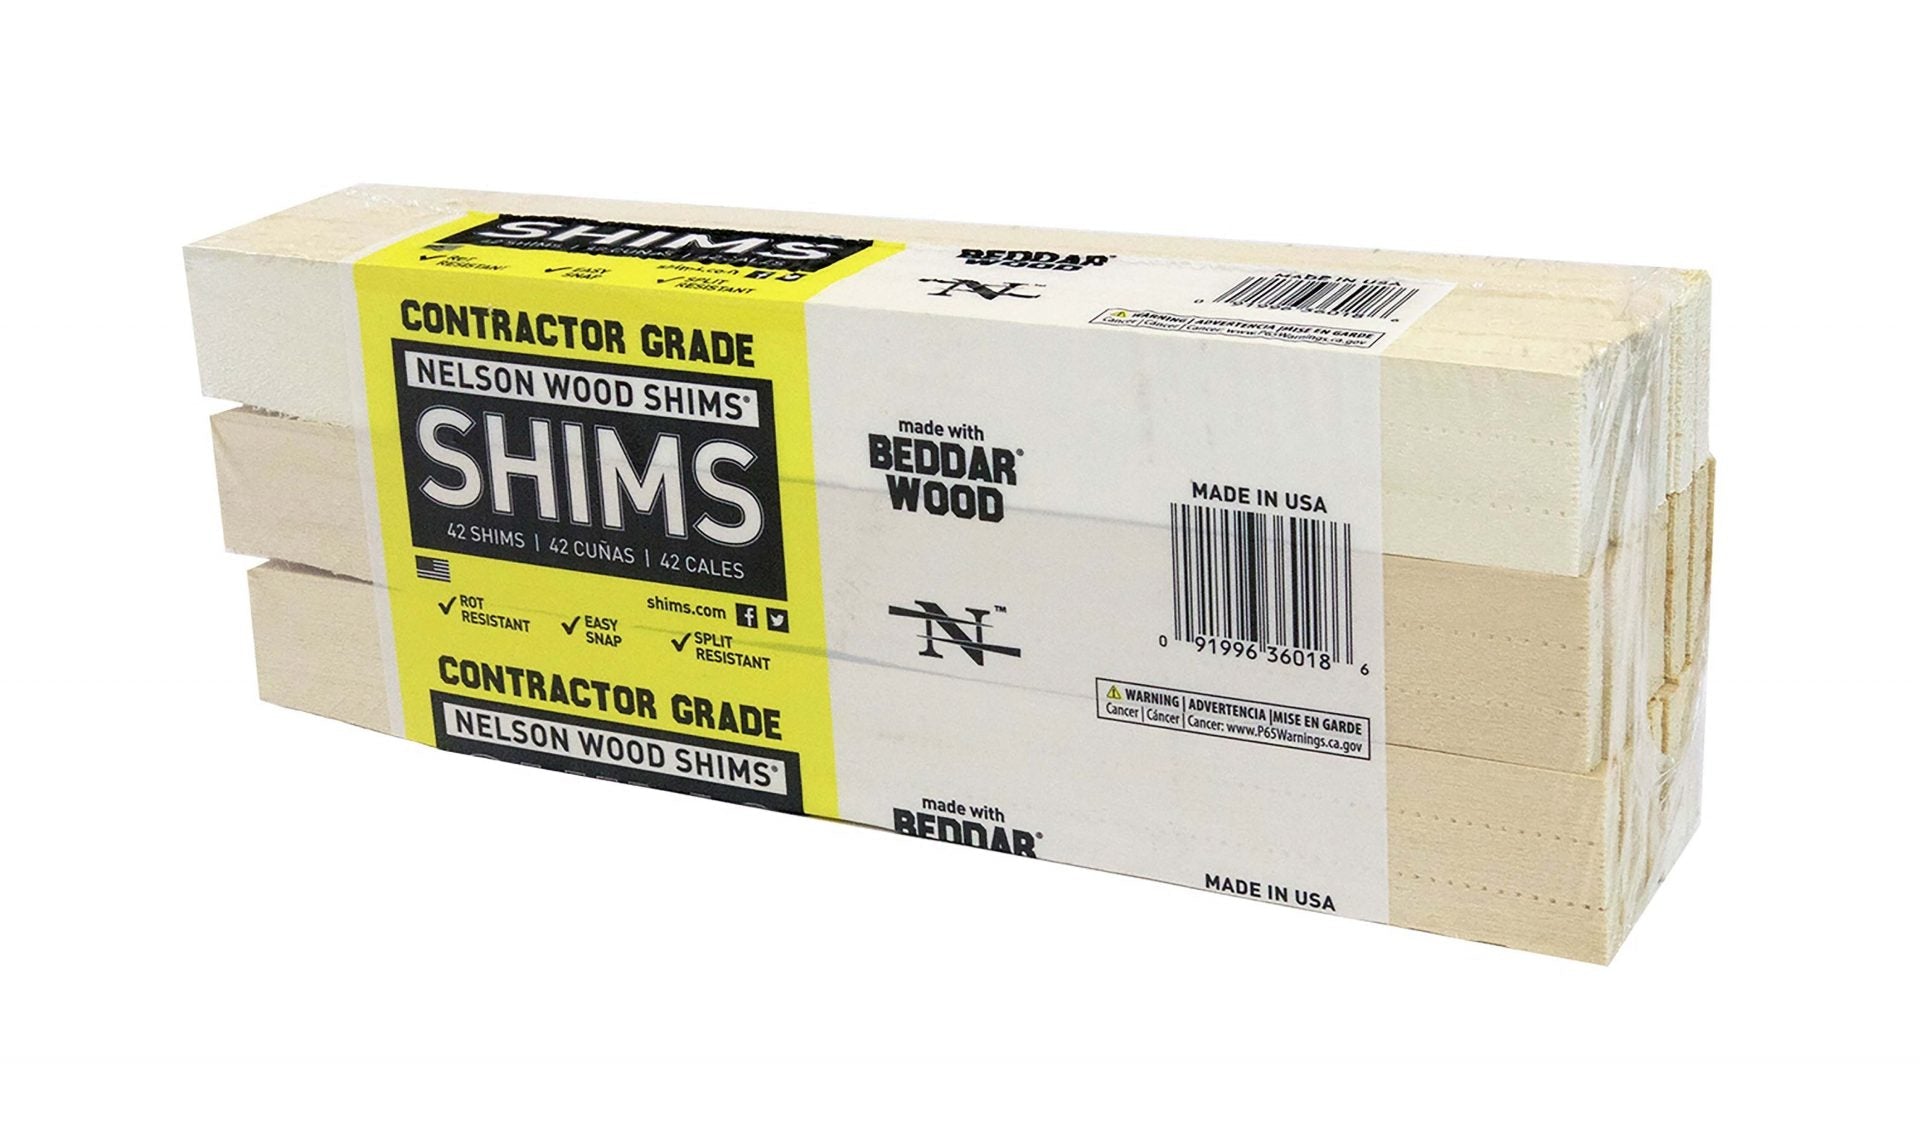 Nelson Wood Shims - Leveling Wedge Professional Contractor DIY Bulk Kit  (8-inch 84 Ct Bundle), Premium Beddar Wood, Indoor/Outdoor Use, All Natural